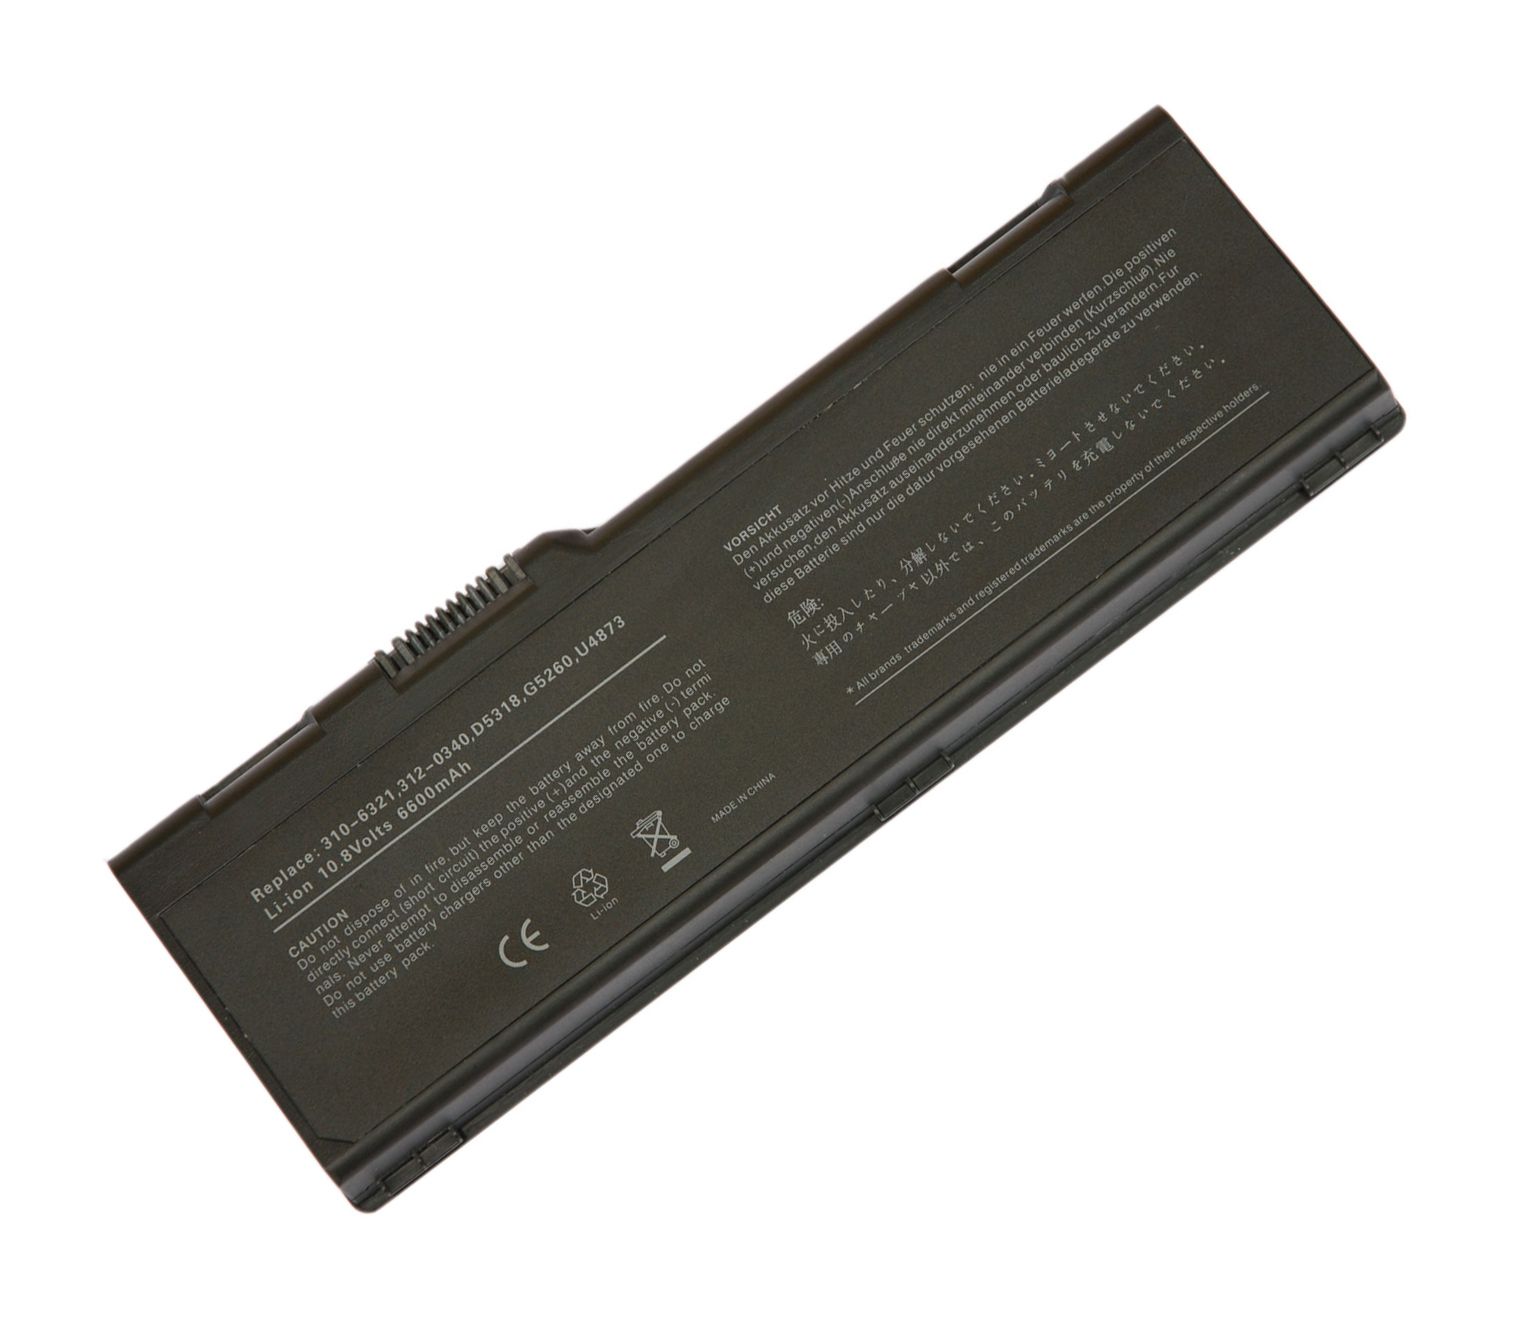  Cell Laptop Battery for Dell Inspiron 6000 9200 9300 9400 E1705 U4873